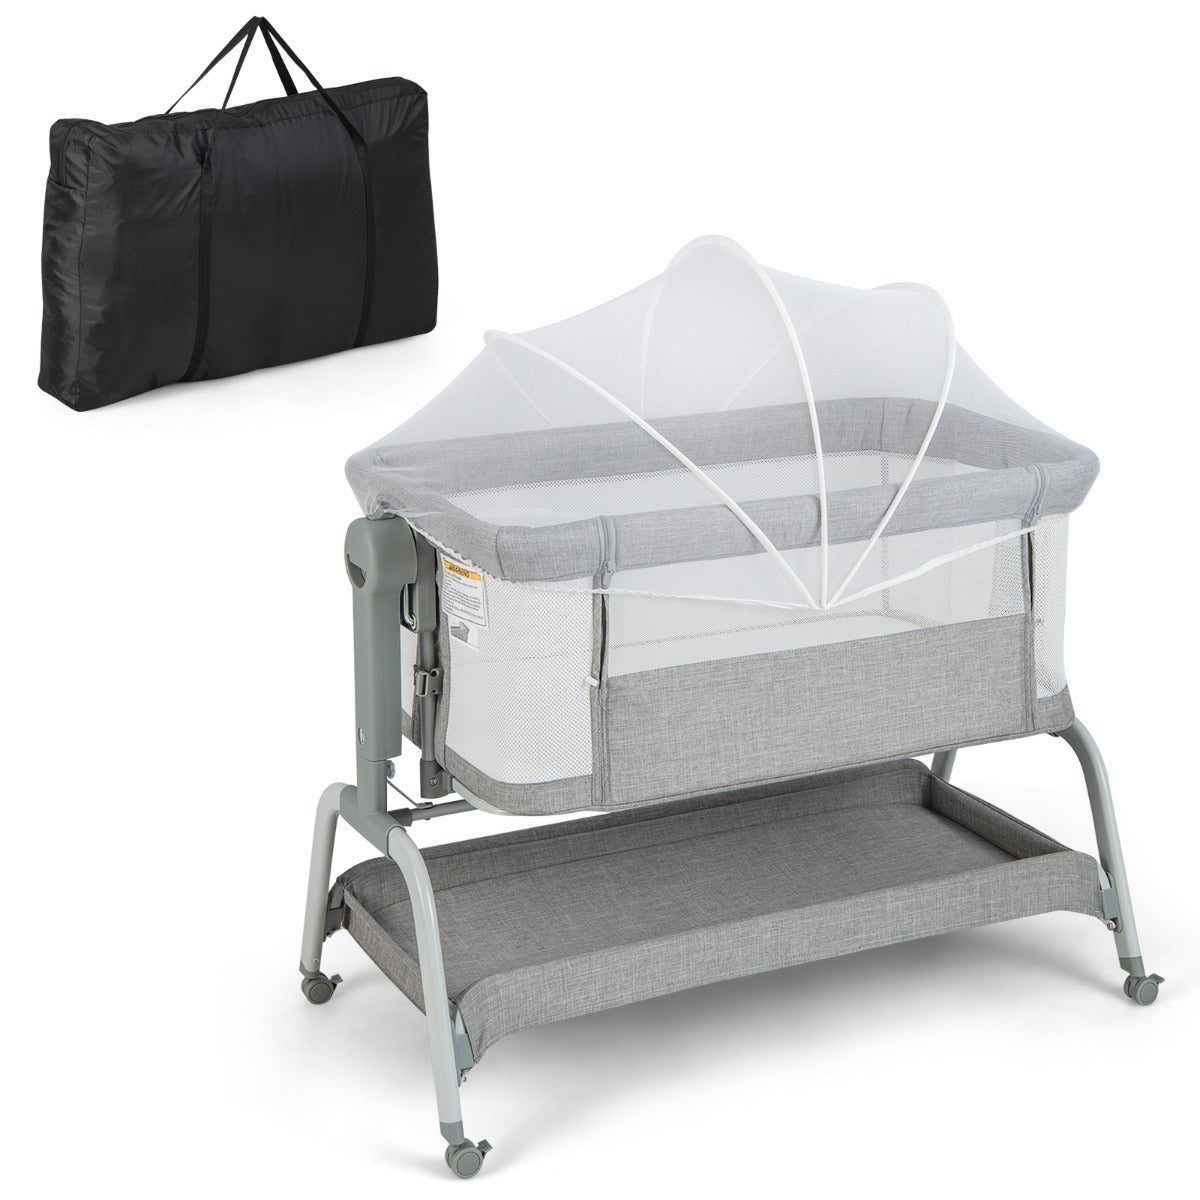 Shop Grey 3-in-1 Travel Cot - Bedside, Stand-Alone, or Rocking Cradle